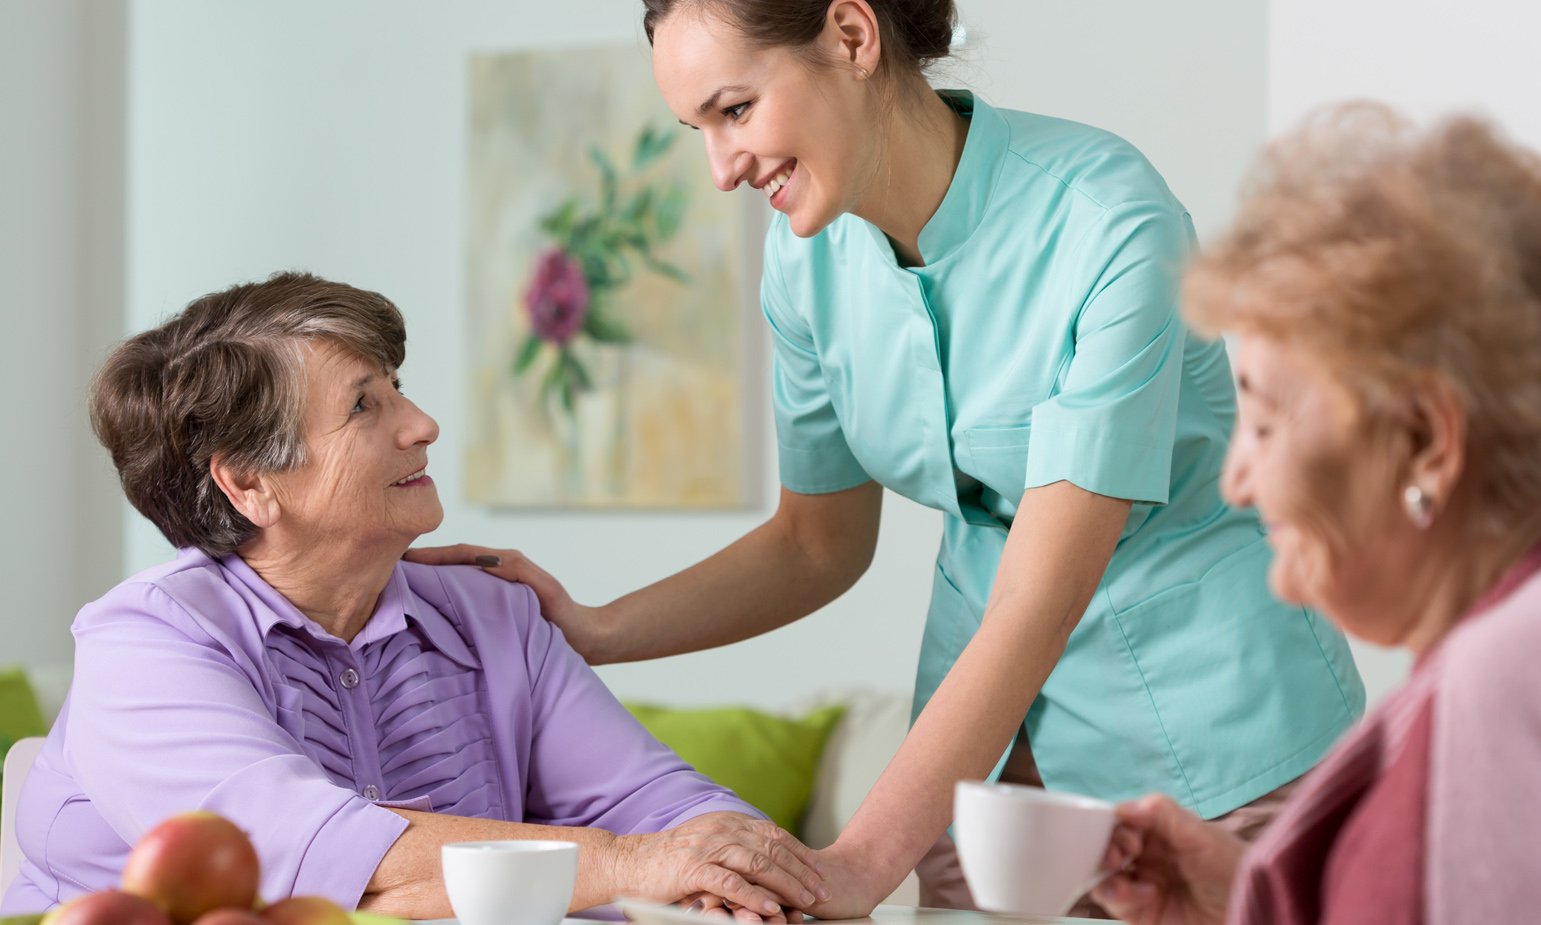 Caring nurse smiling with older lady seated in dining area